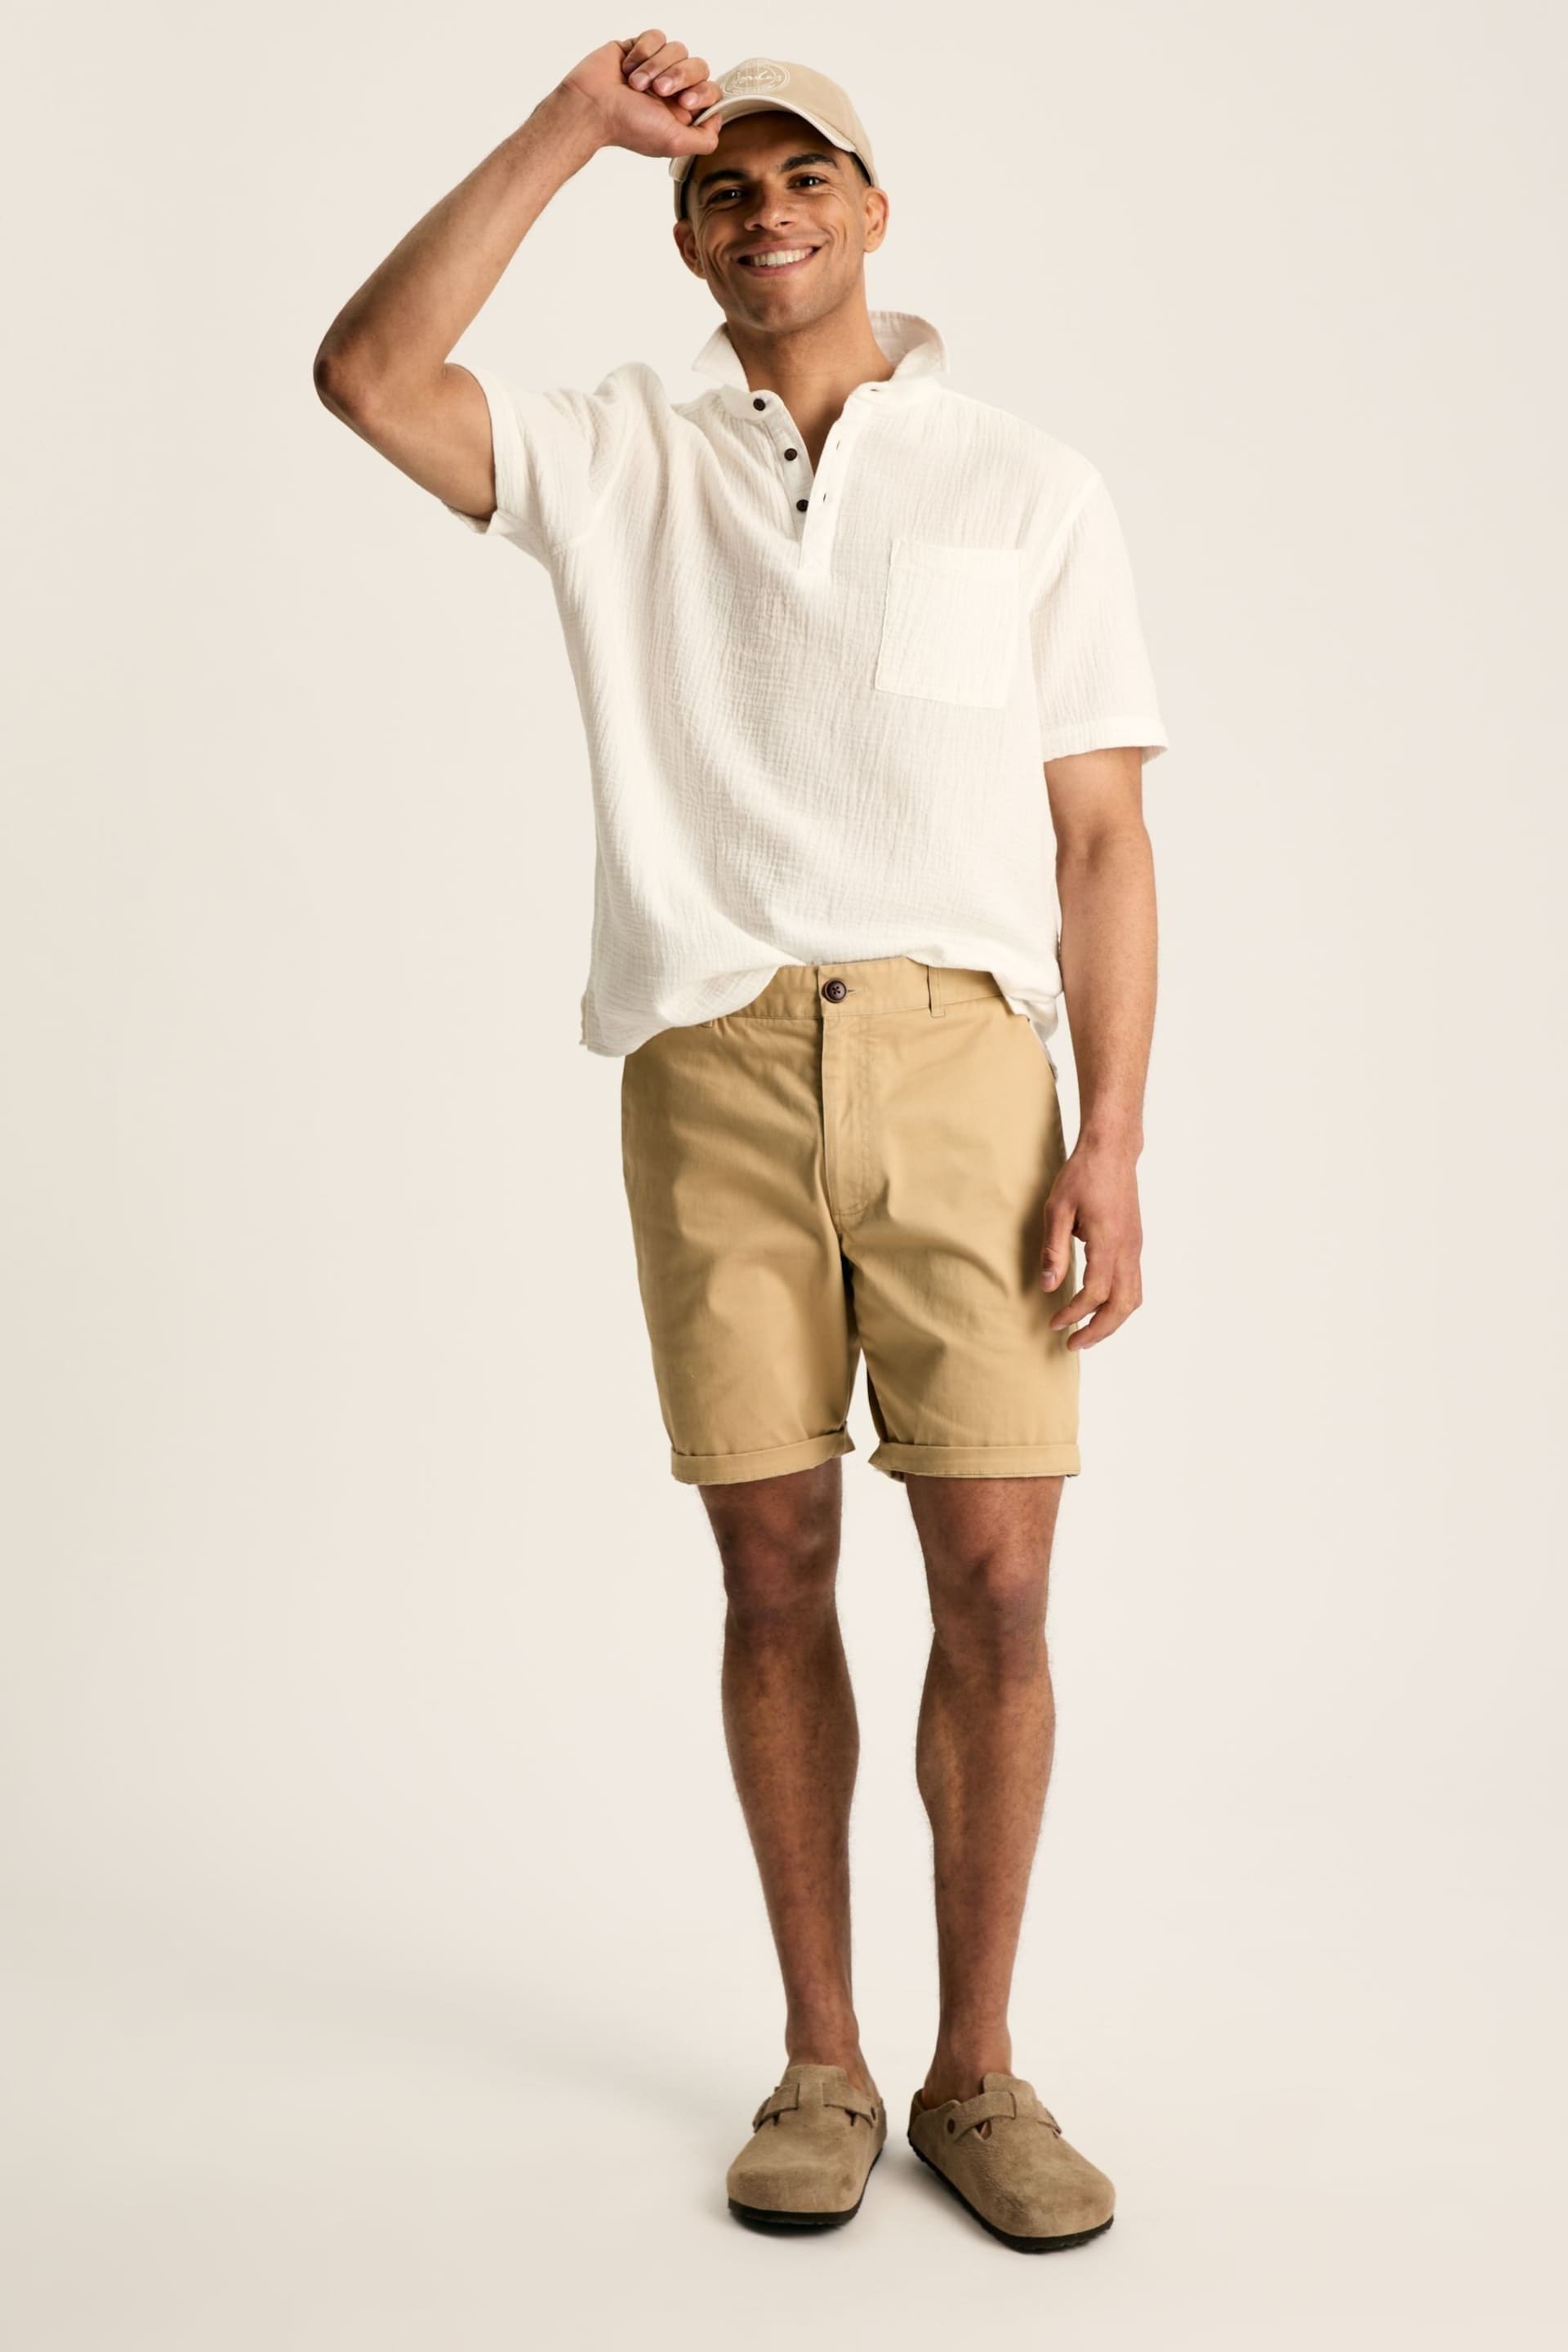 Joules Cheesecloth Cream Popover Short Sleeve Shirt - Image 3 of 7